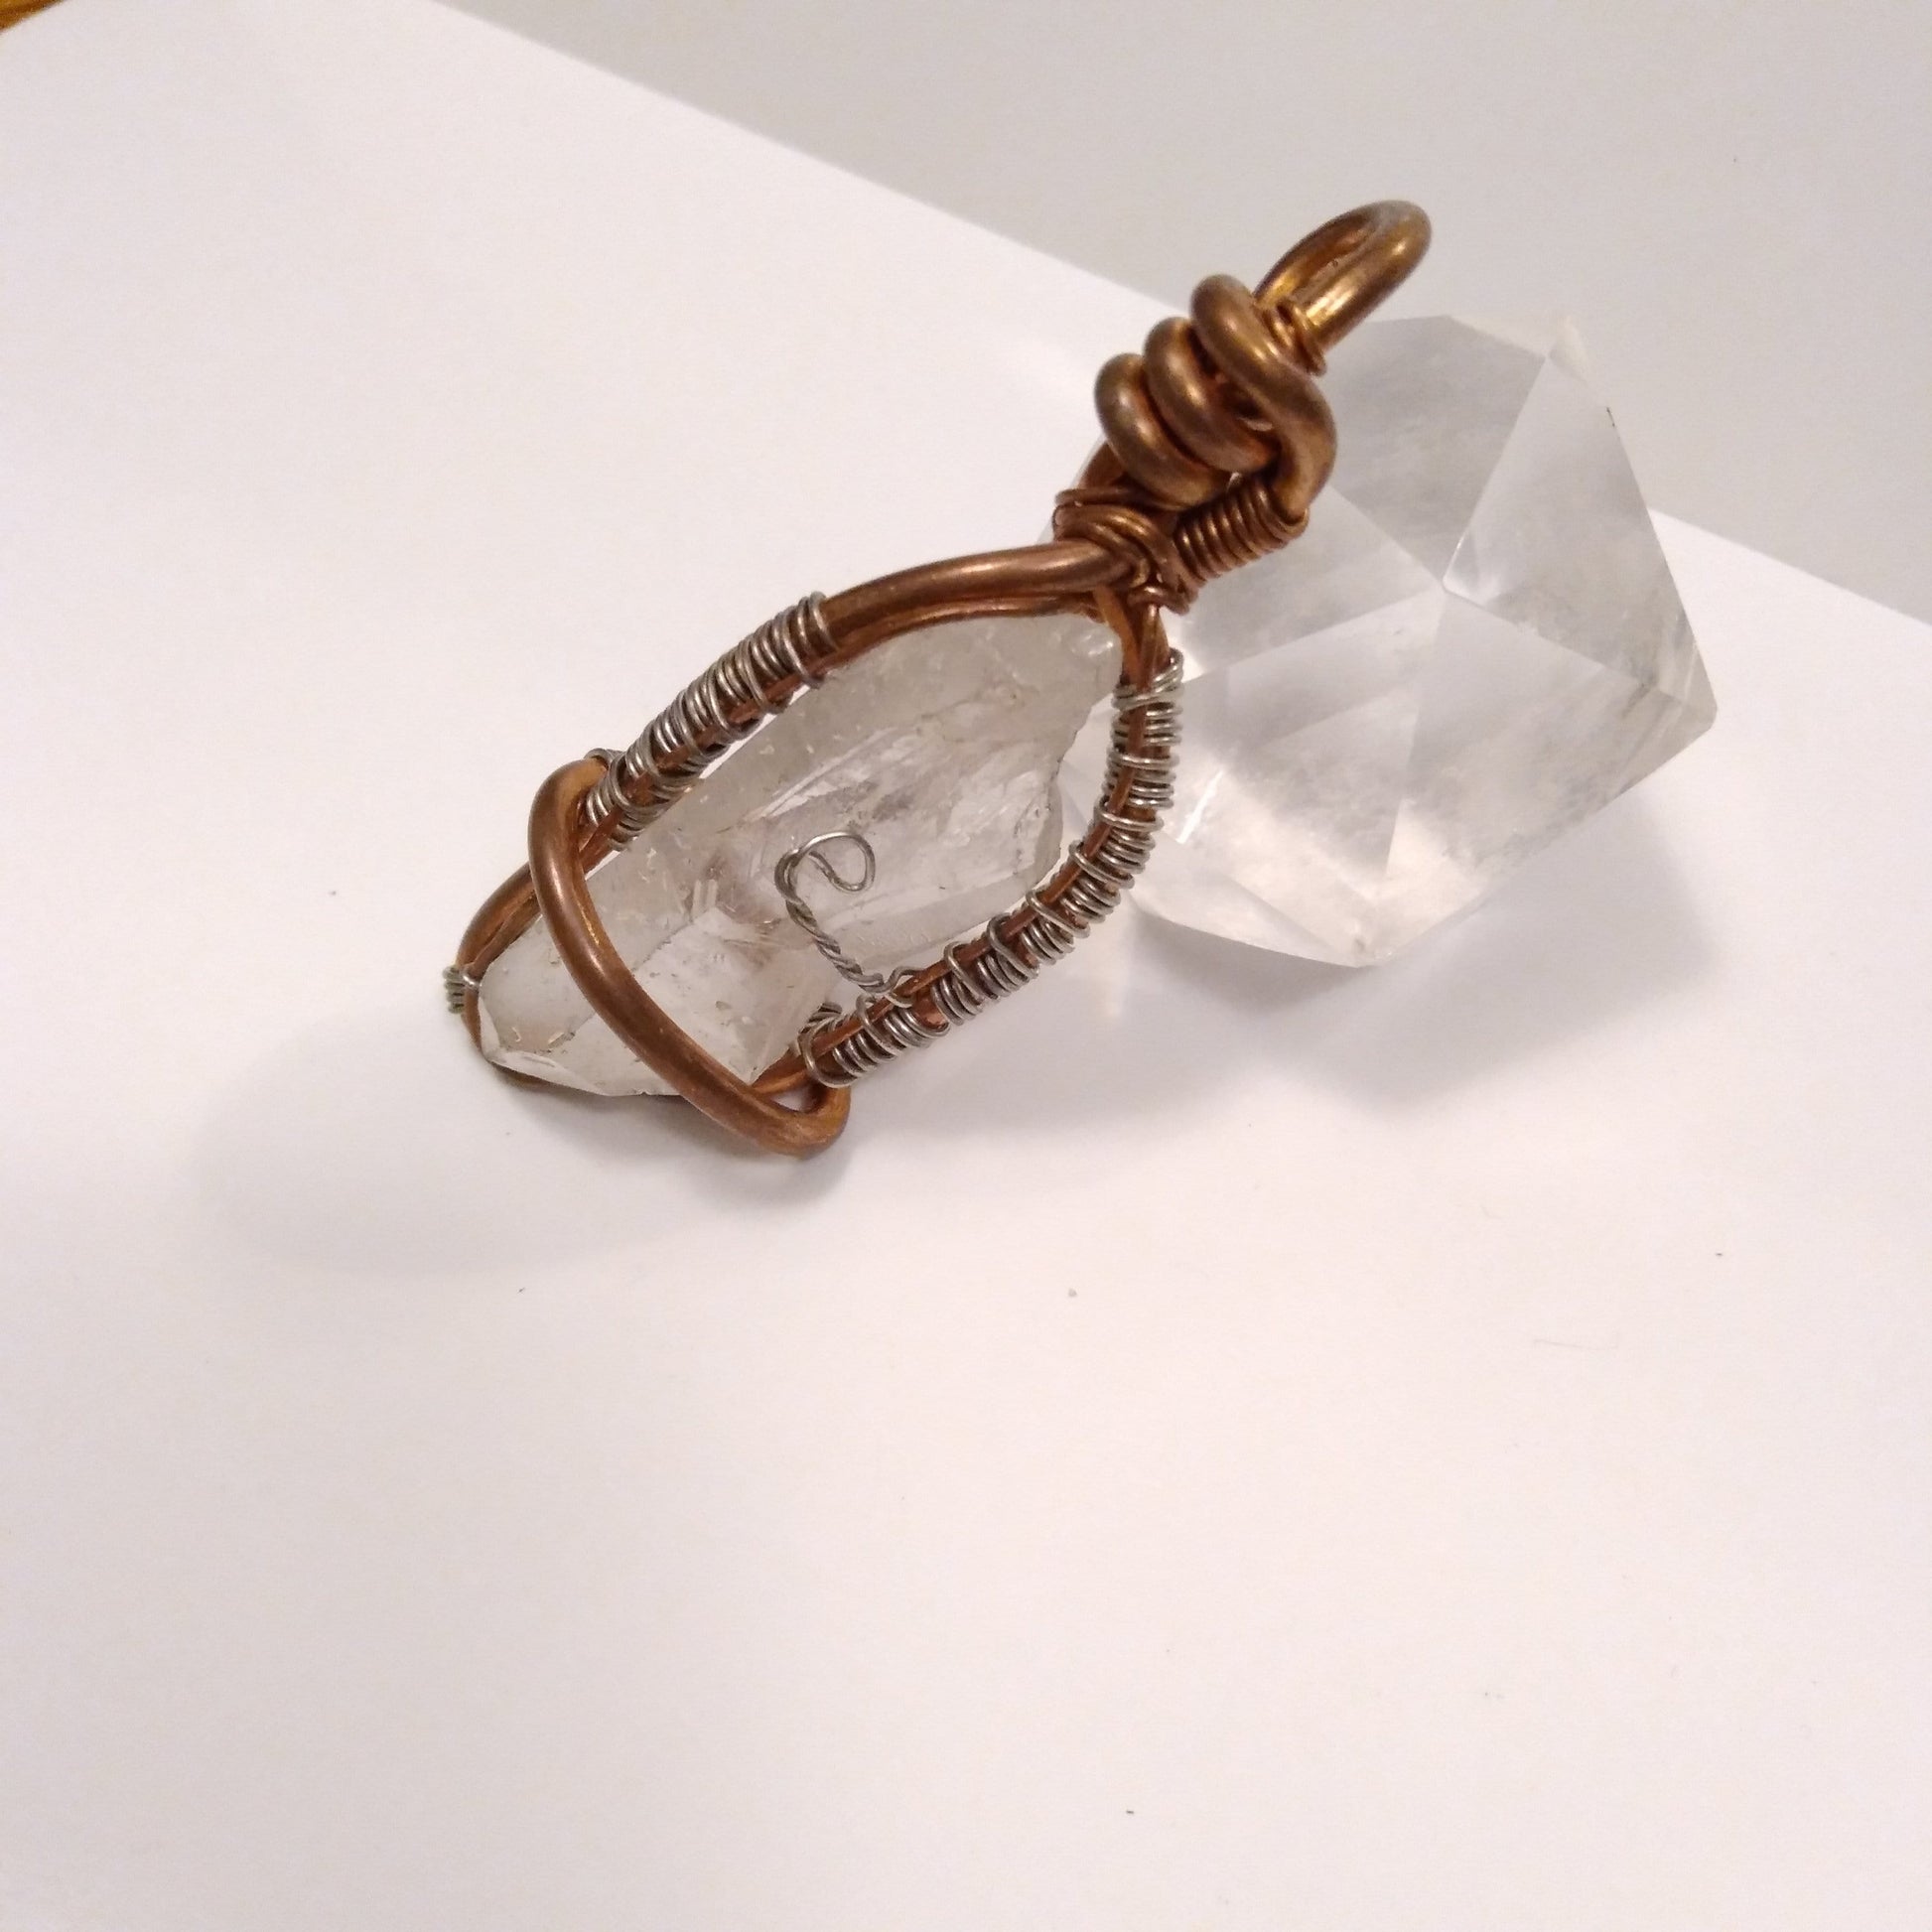 Legend Wire Wrapped Quartz Pendant - Innovated Visions Jewelry